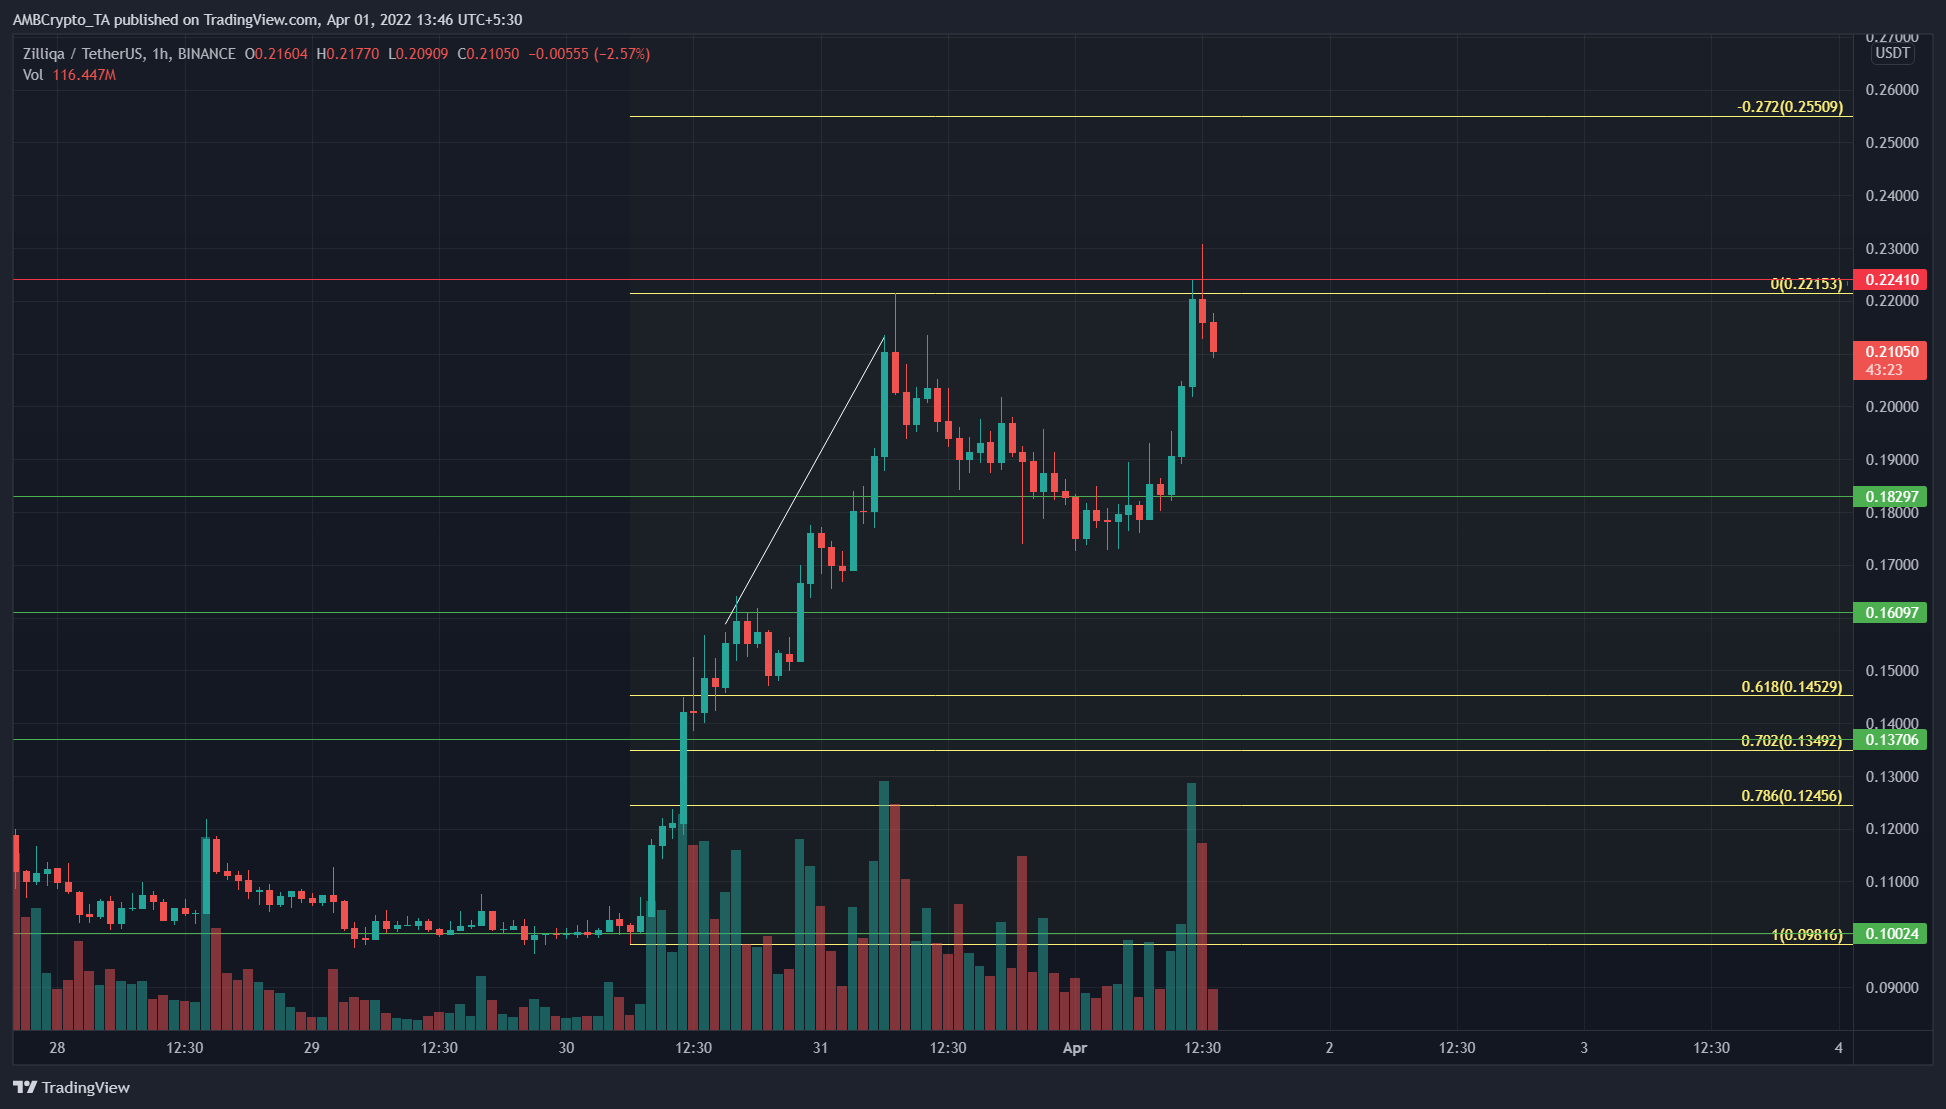 Zilliqa has seen a pullback to a support level, further upside was likely